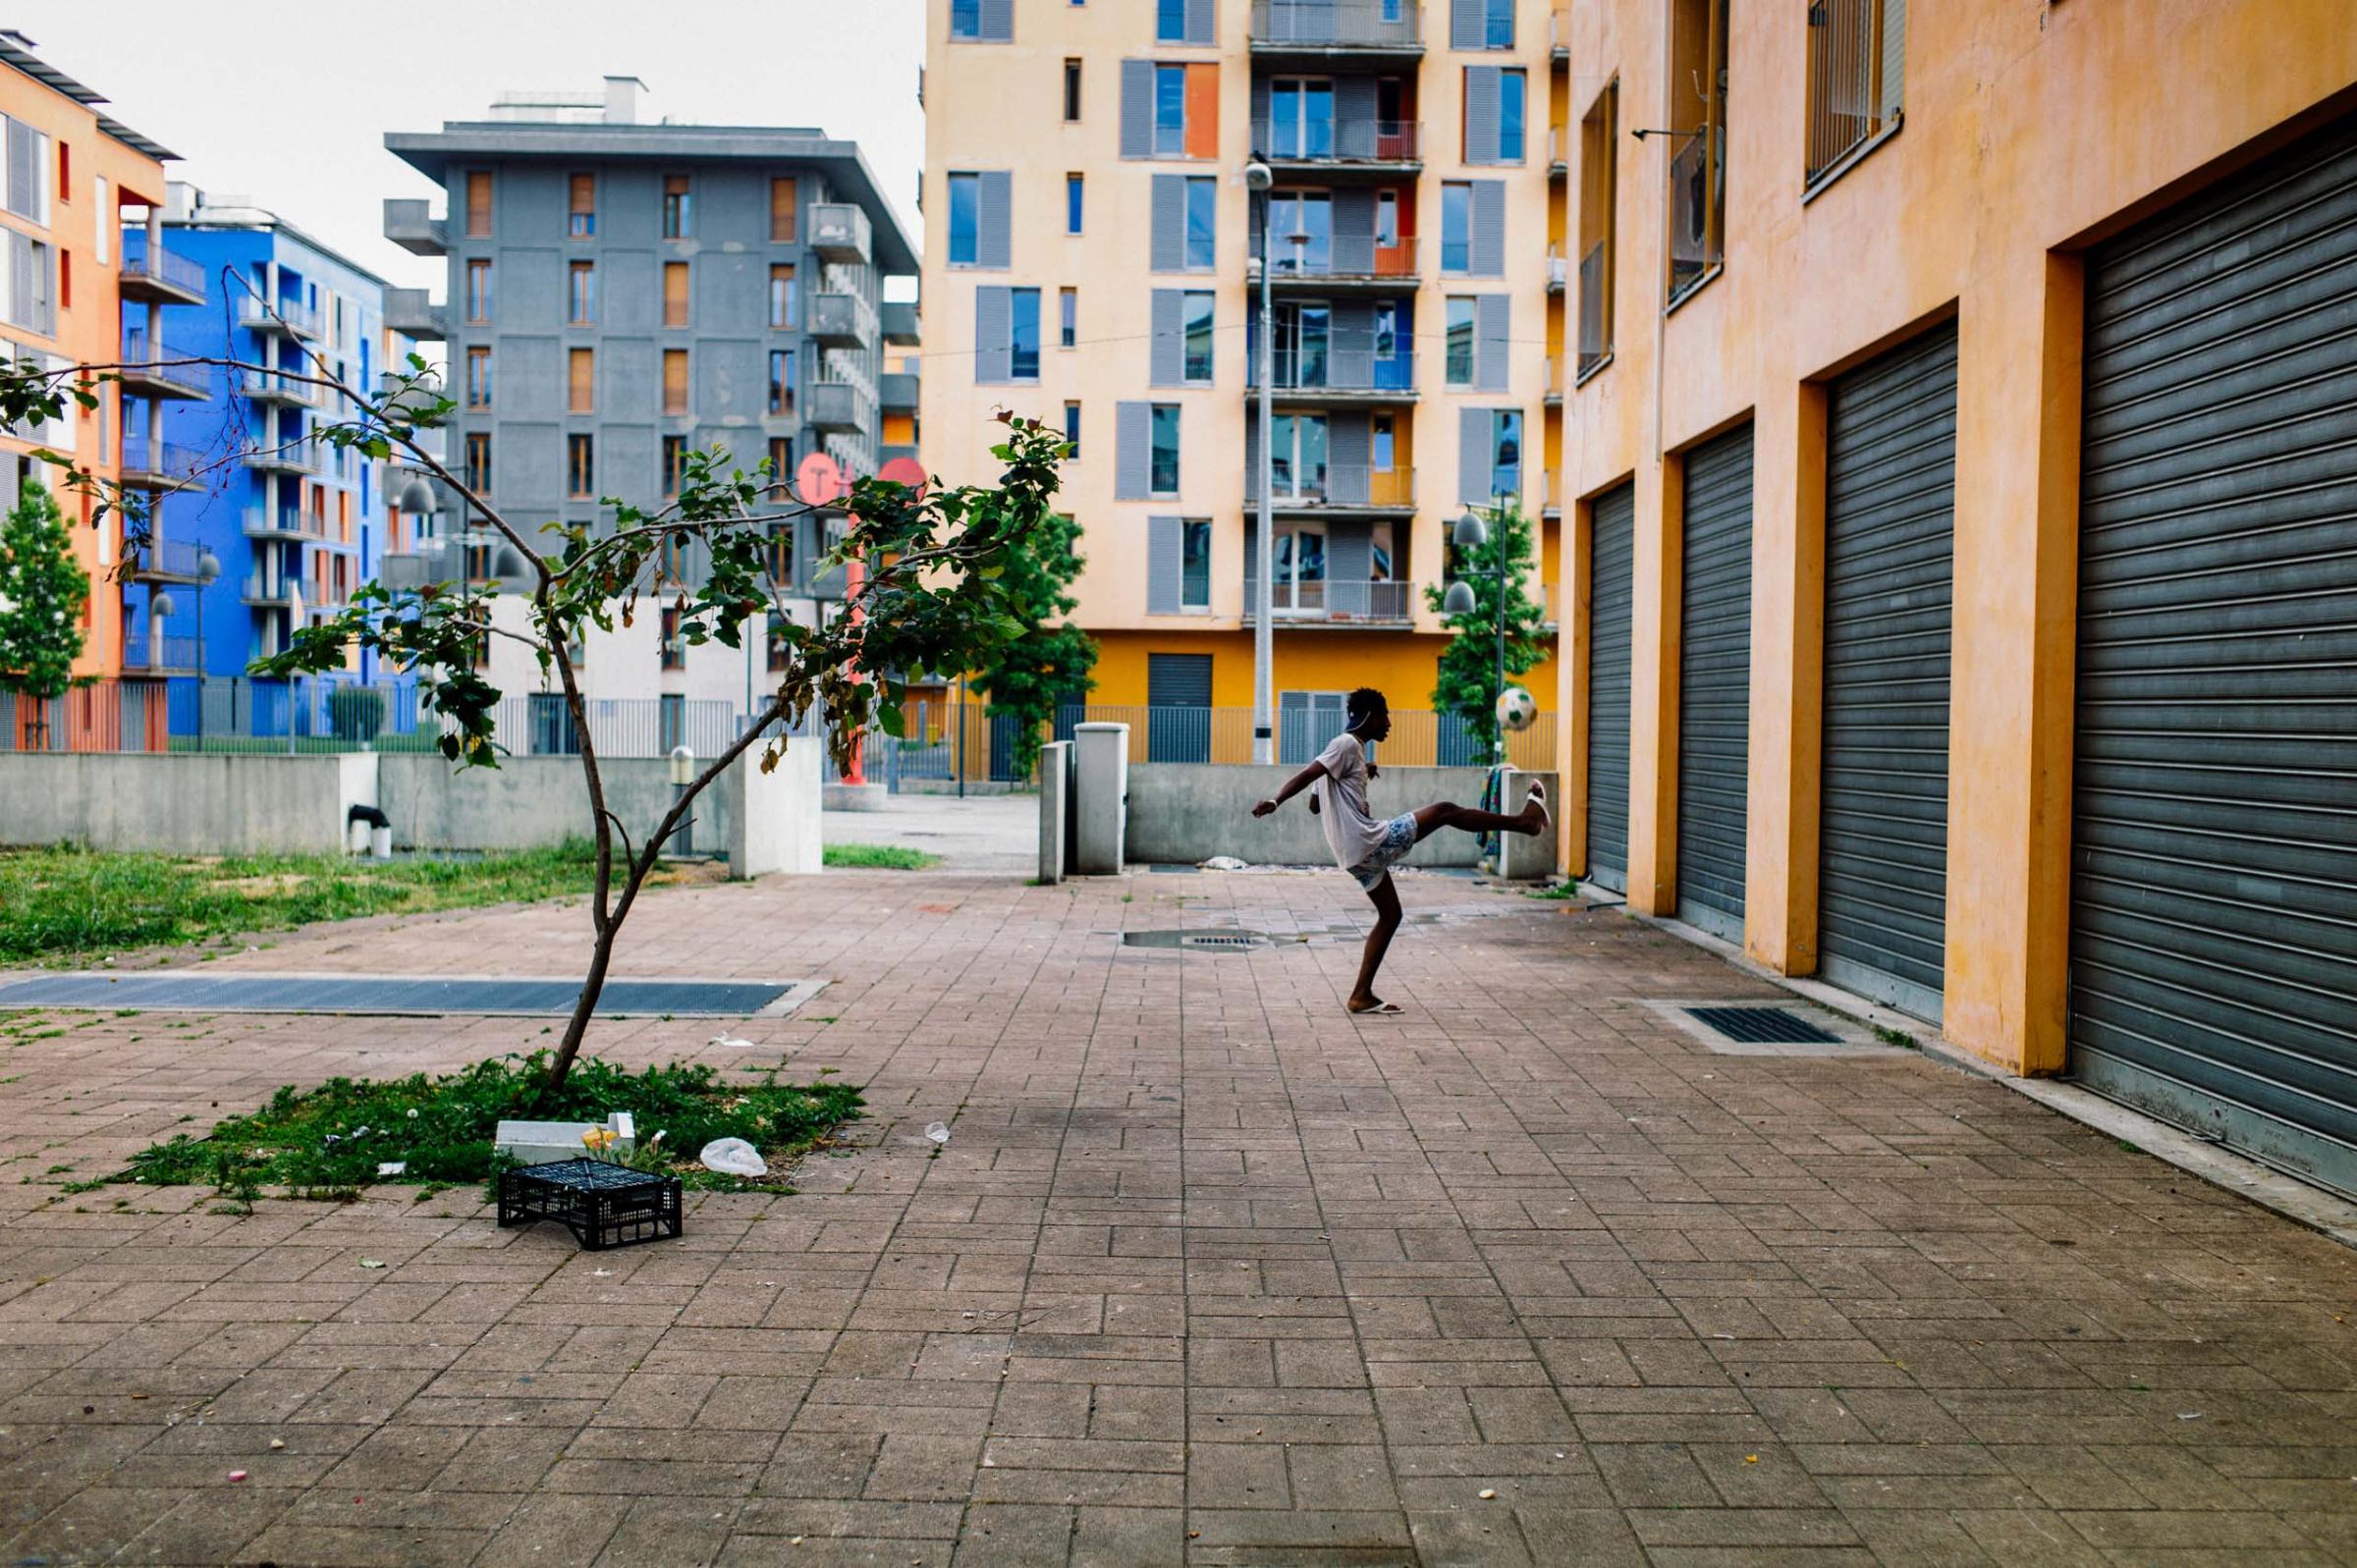 The Olympic Village in Turin, host of the 2006 Winter Olympics, photographed in June 2016. After sitting empty for years, the buildings became a home for squatters and later for more than 1,000 migrants and refugees, many from Africa.